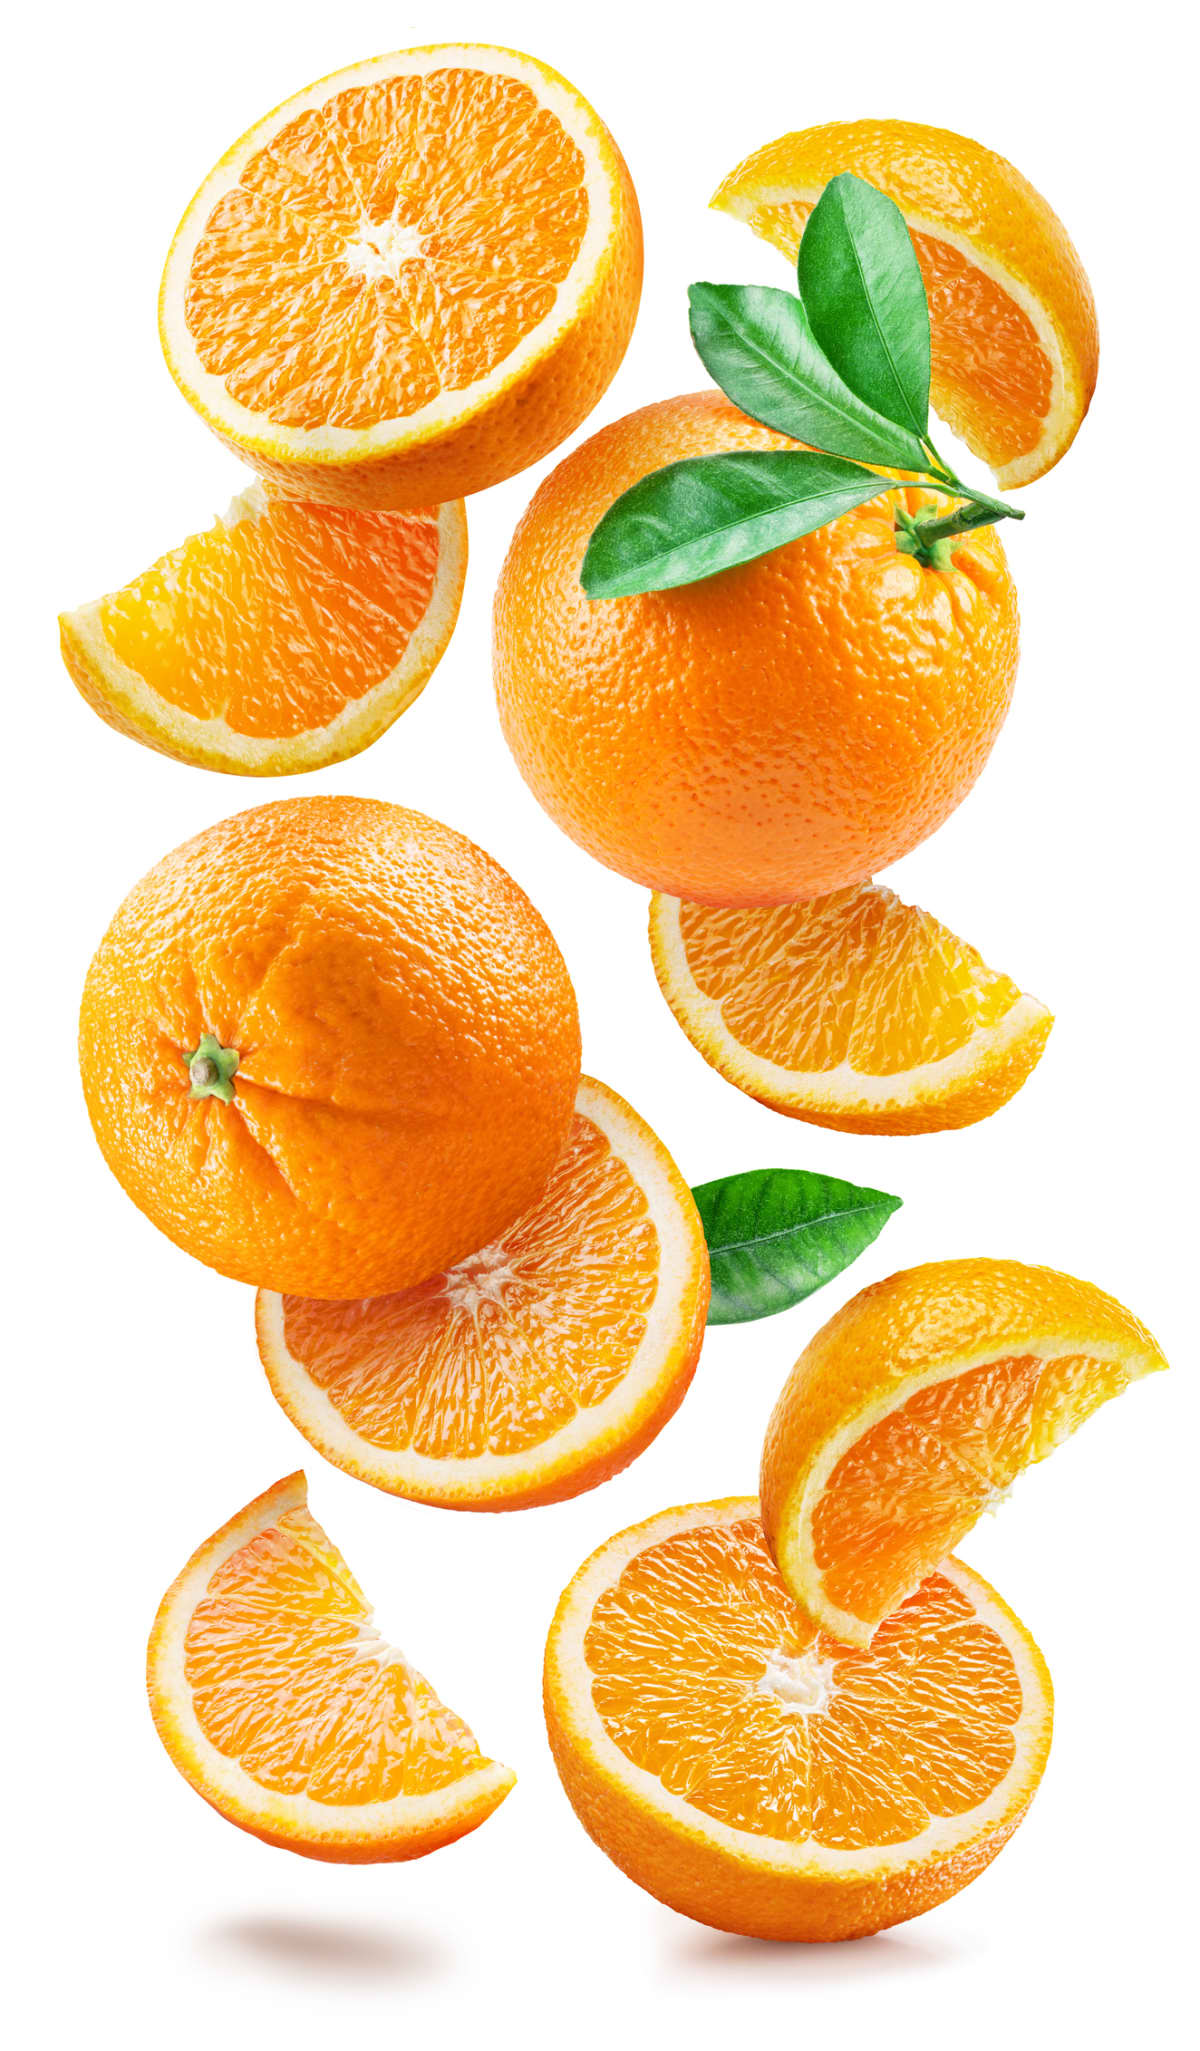 Ripe oranges with halves and slices with orange tree leaves randomly falling or levitating on a white background